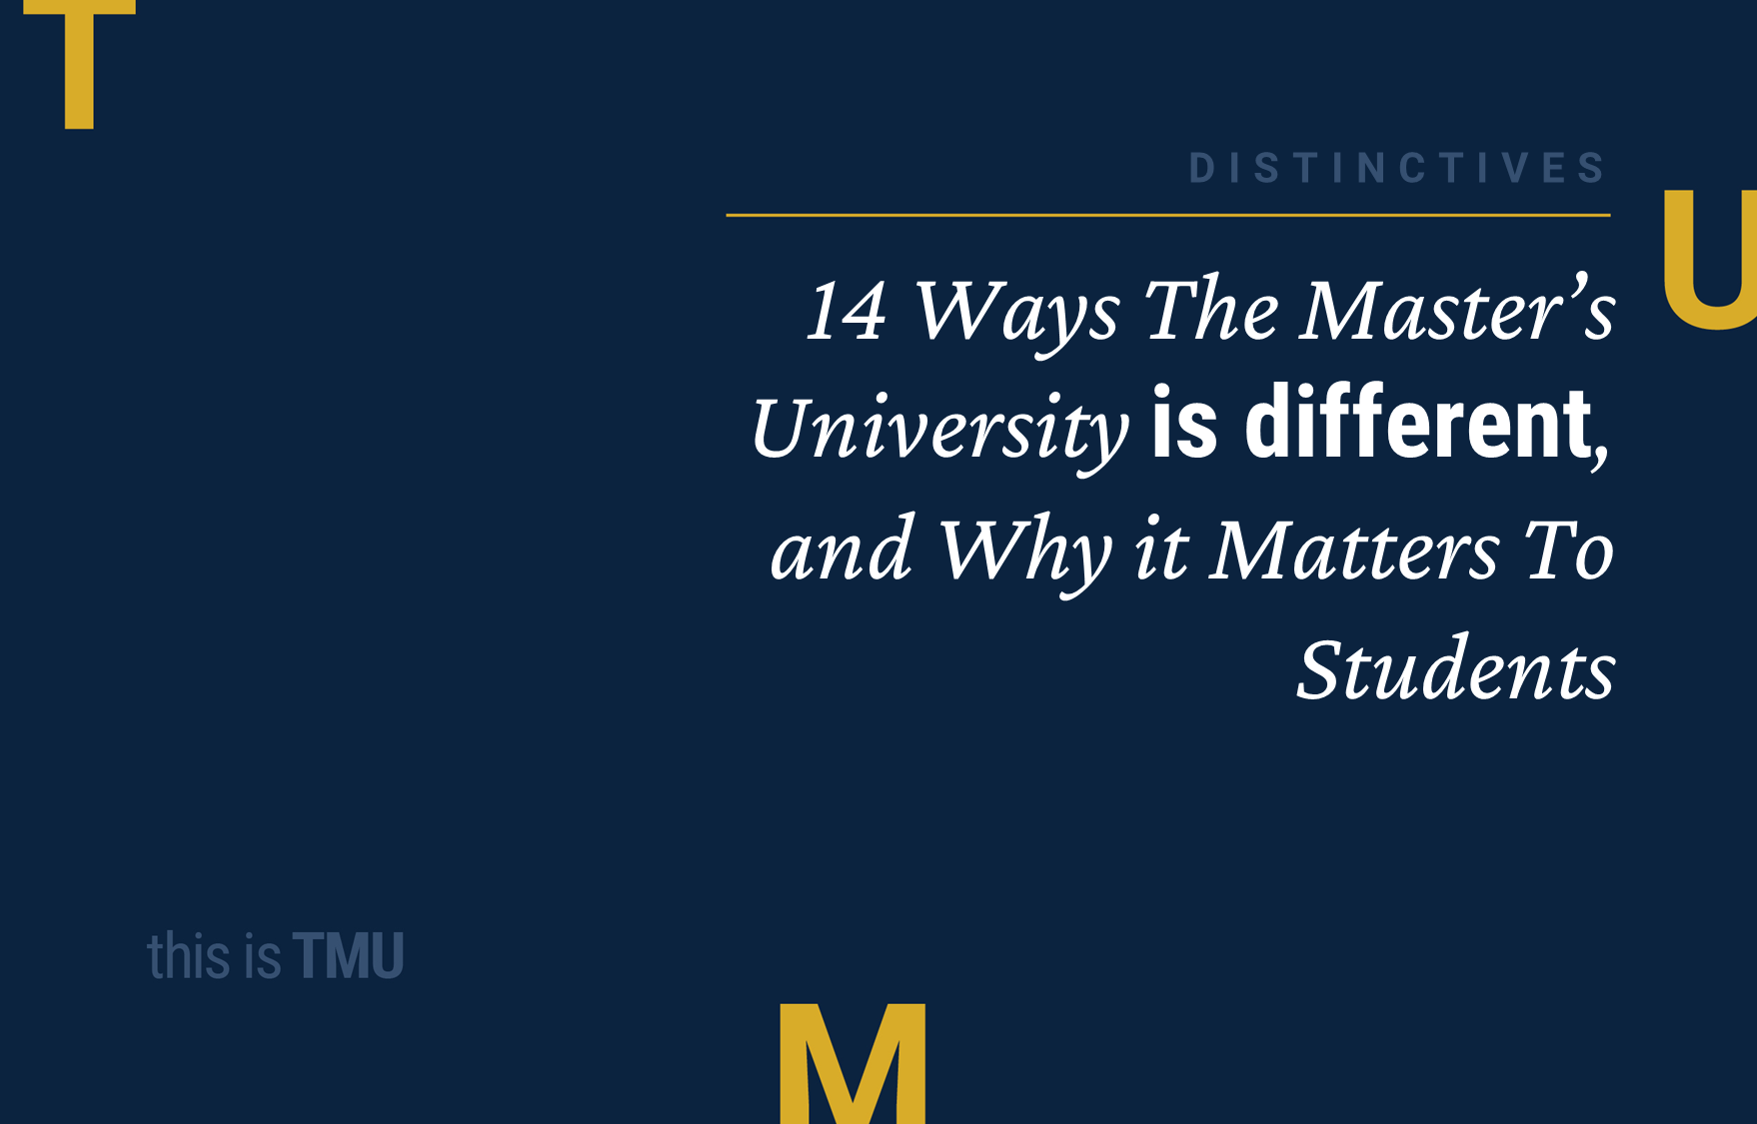 14 Ways TMU is Different, and Why it Matters To Students image